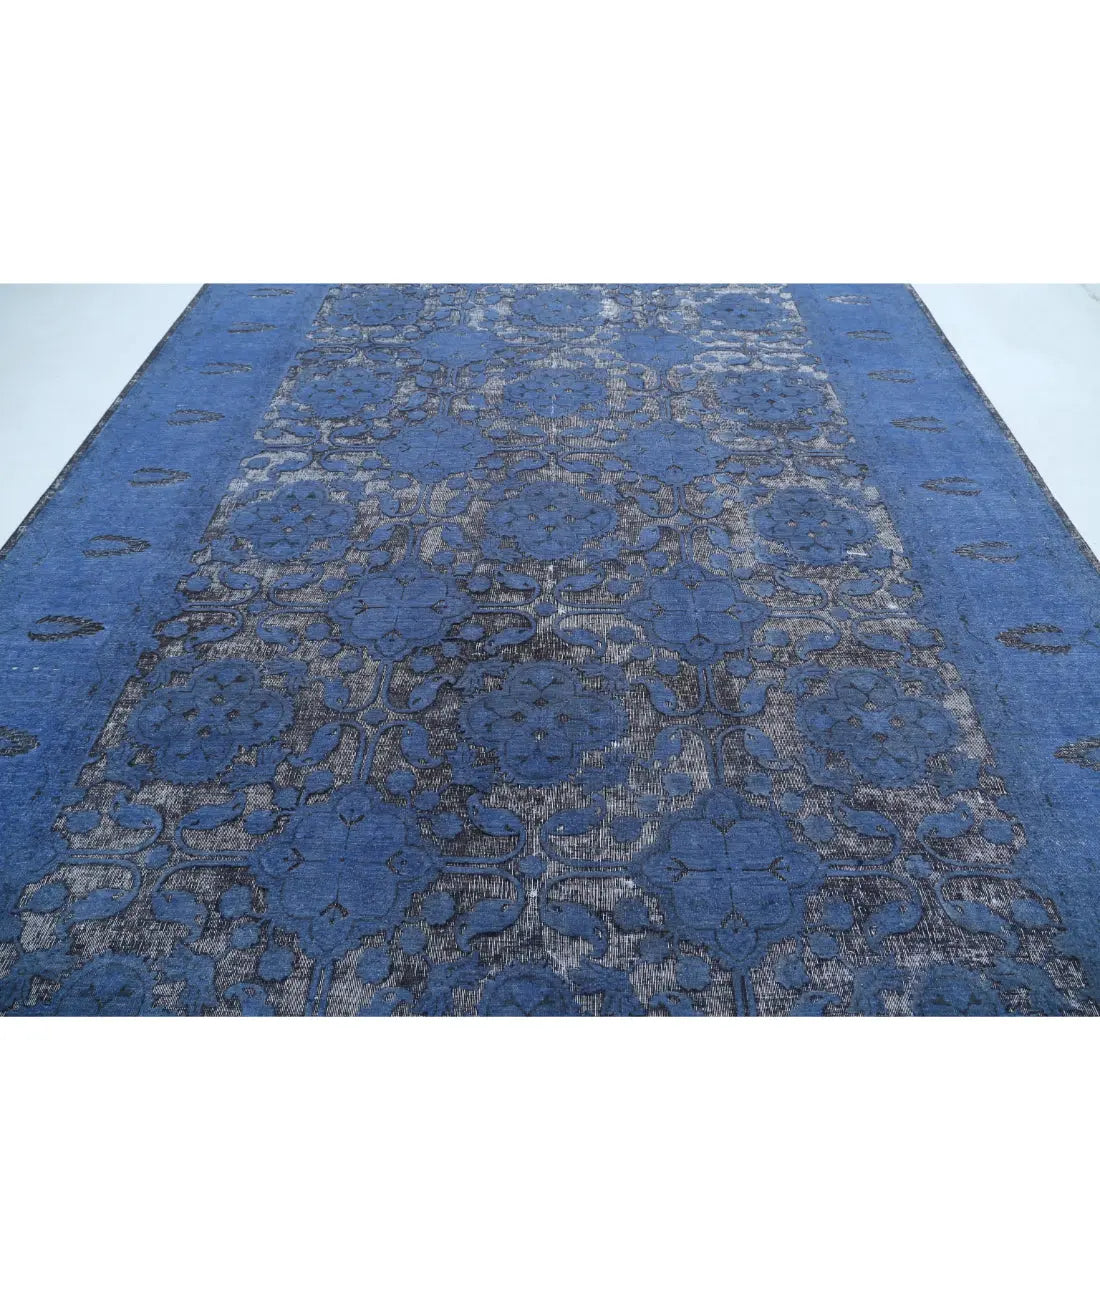 Hand Knotted Onyx Wool Rug - 9'6'' x 13'6''